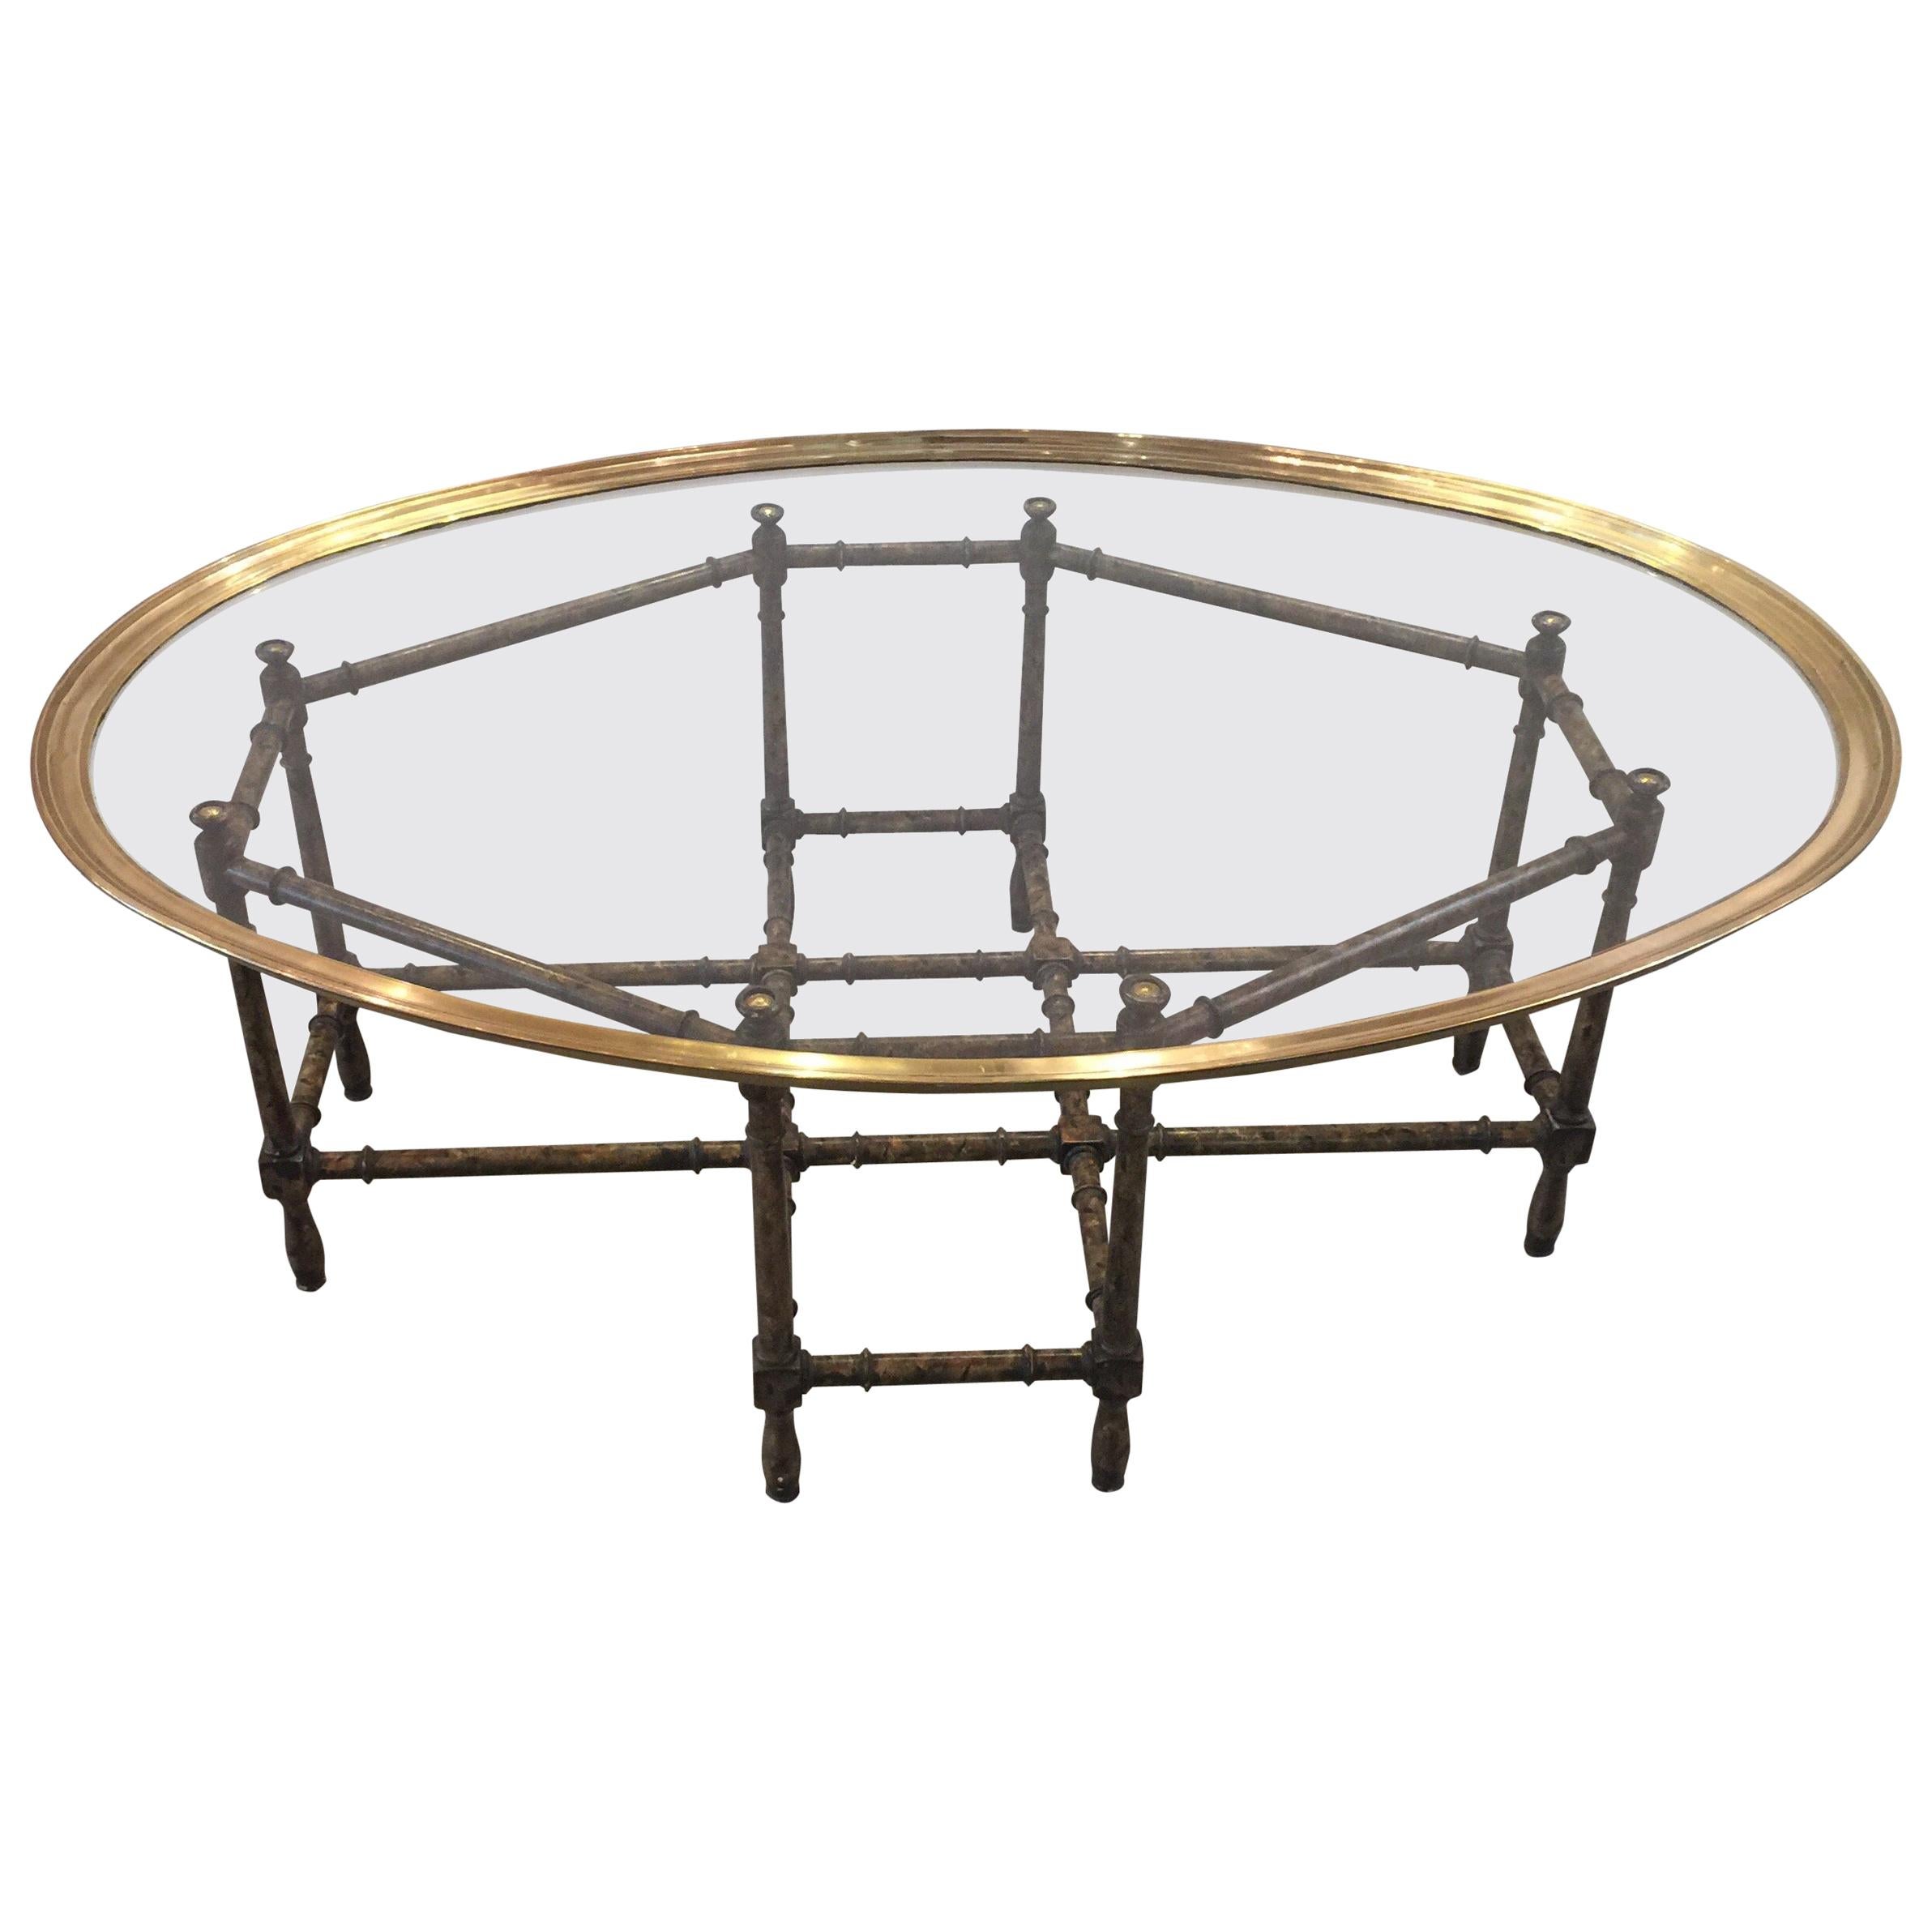 Baker Faux Bamboo/Tortoise Cocktail or Coffee Table with Brass and Glass Top